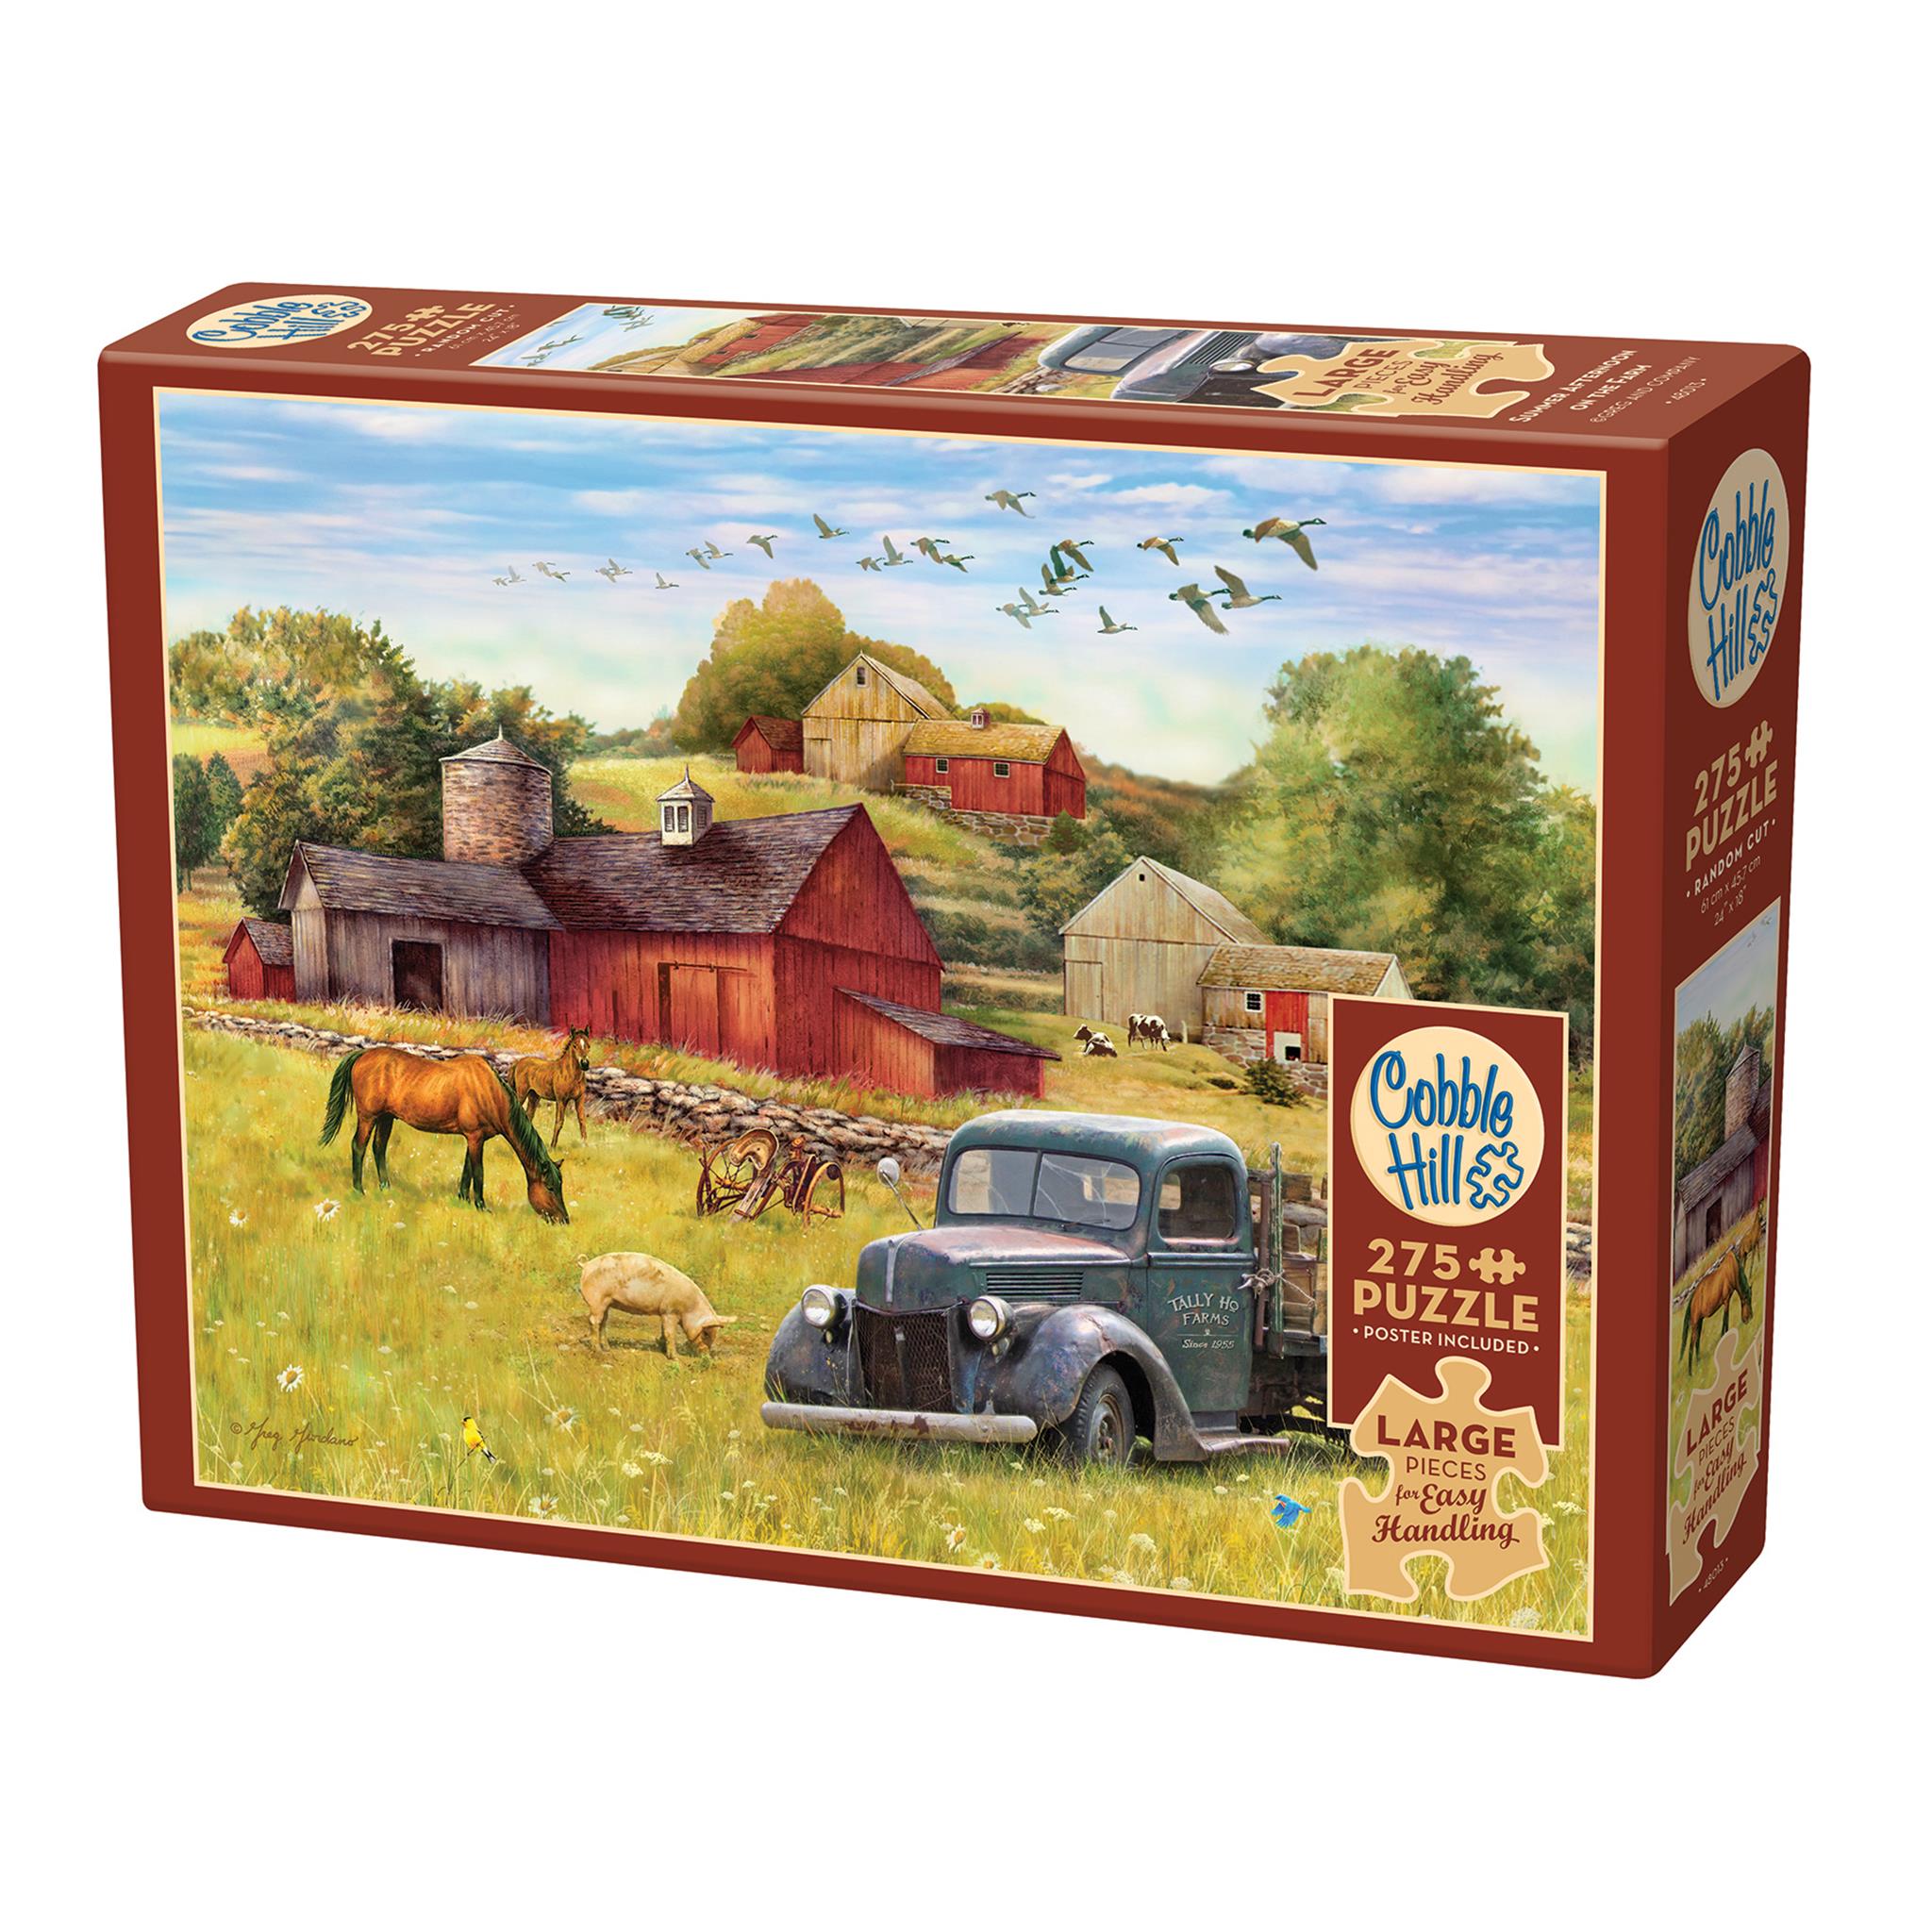 Summer Afternoon on the Farm 275 Piece Puzzle Cobble Hill